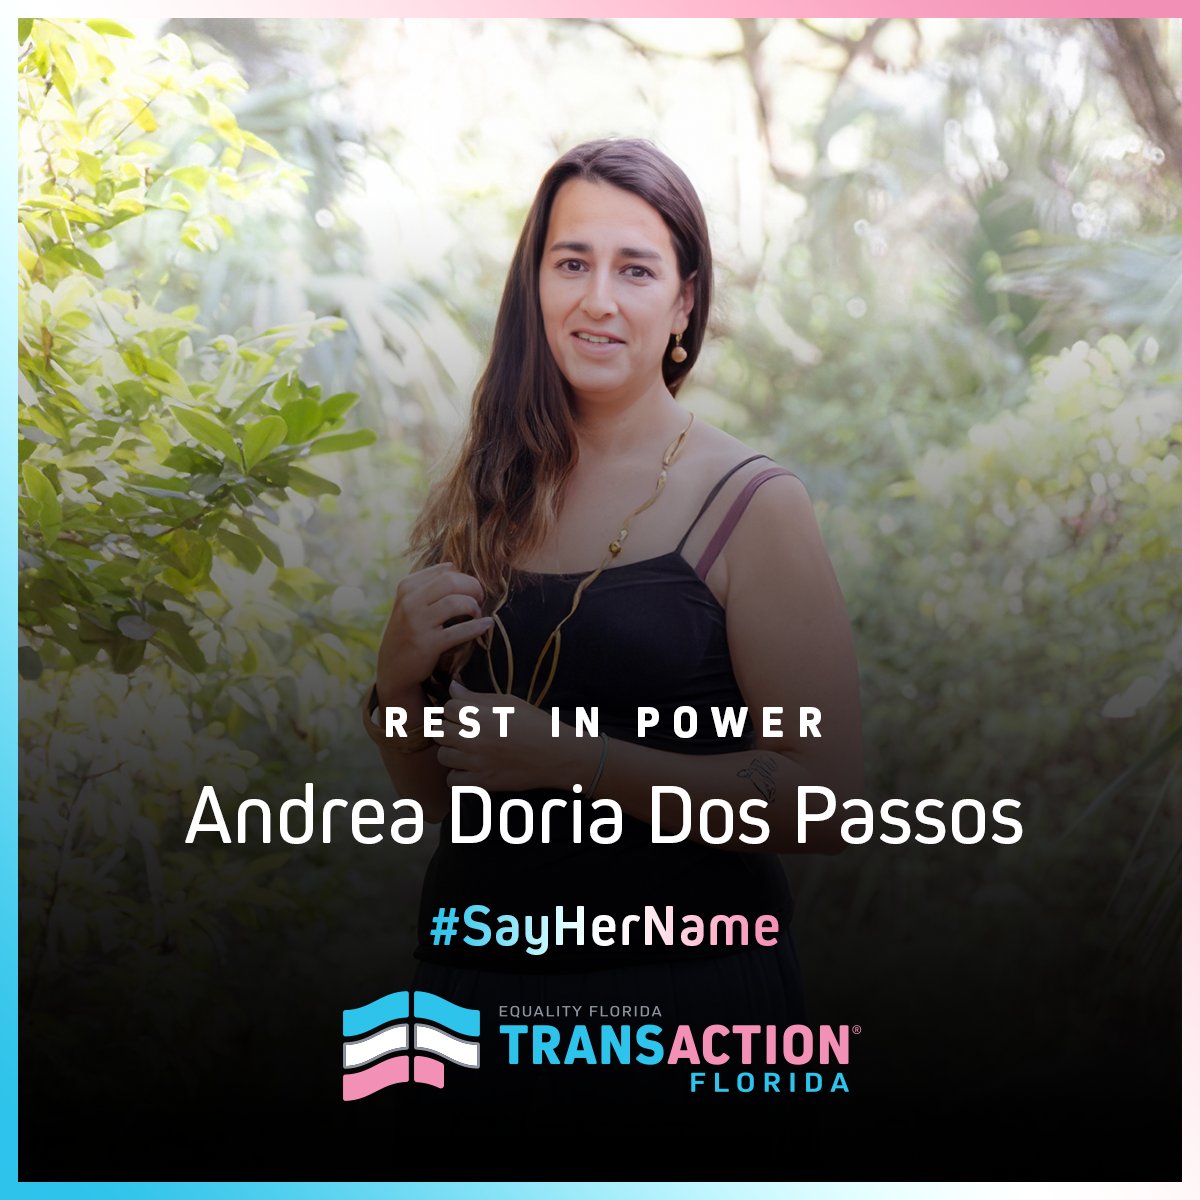 TW: Anti-trans violence We are devastated and heartbroken to hear about the brutal murder of Andrea Doria Dos Passos, a 37-year old transgender woman, who was attacked in her sleep yesterday in front of the Miami City Ballet in Miami Beach. cbsnews.com/miami/news/arr…